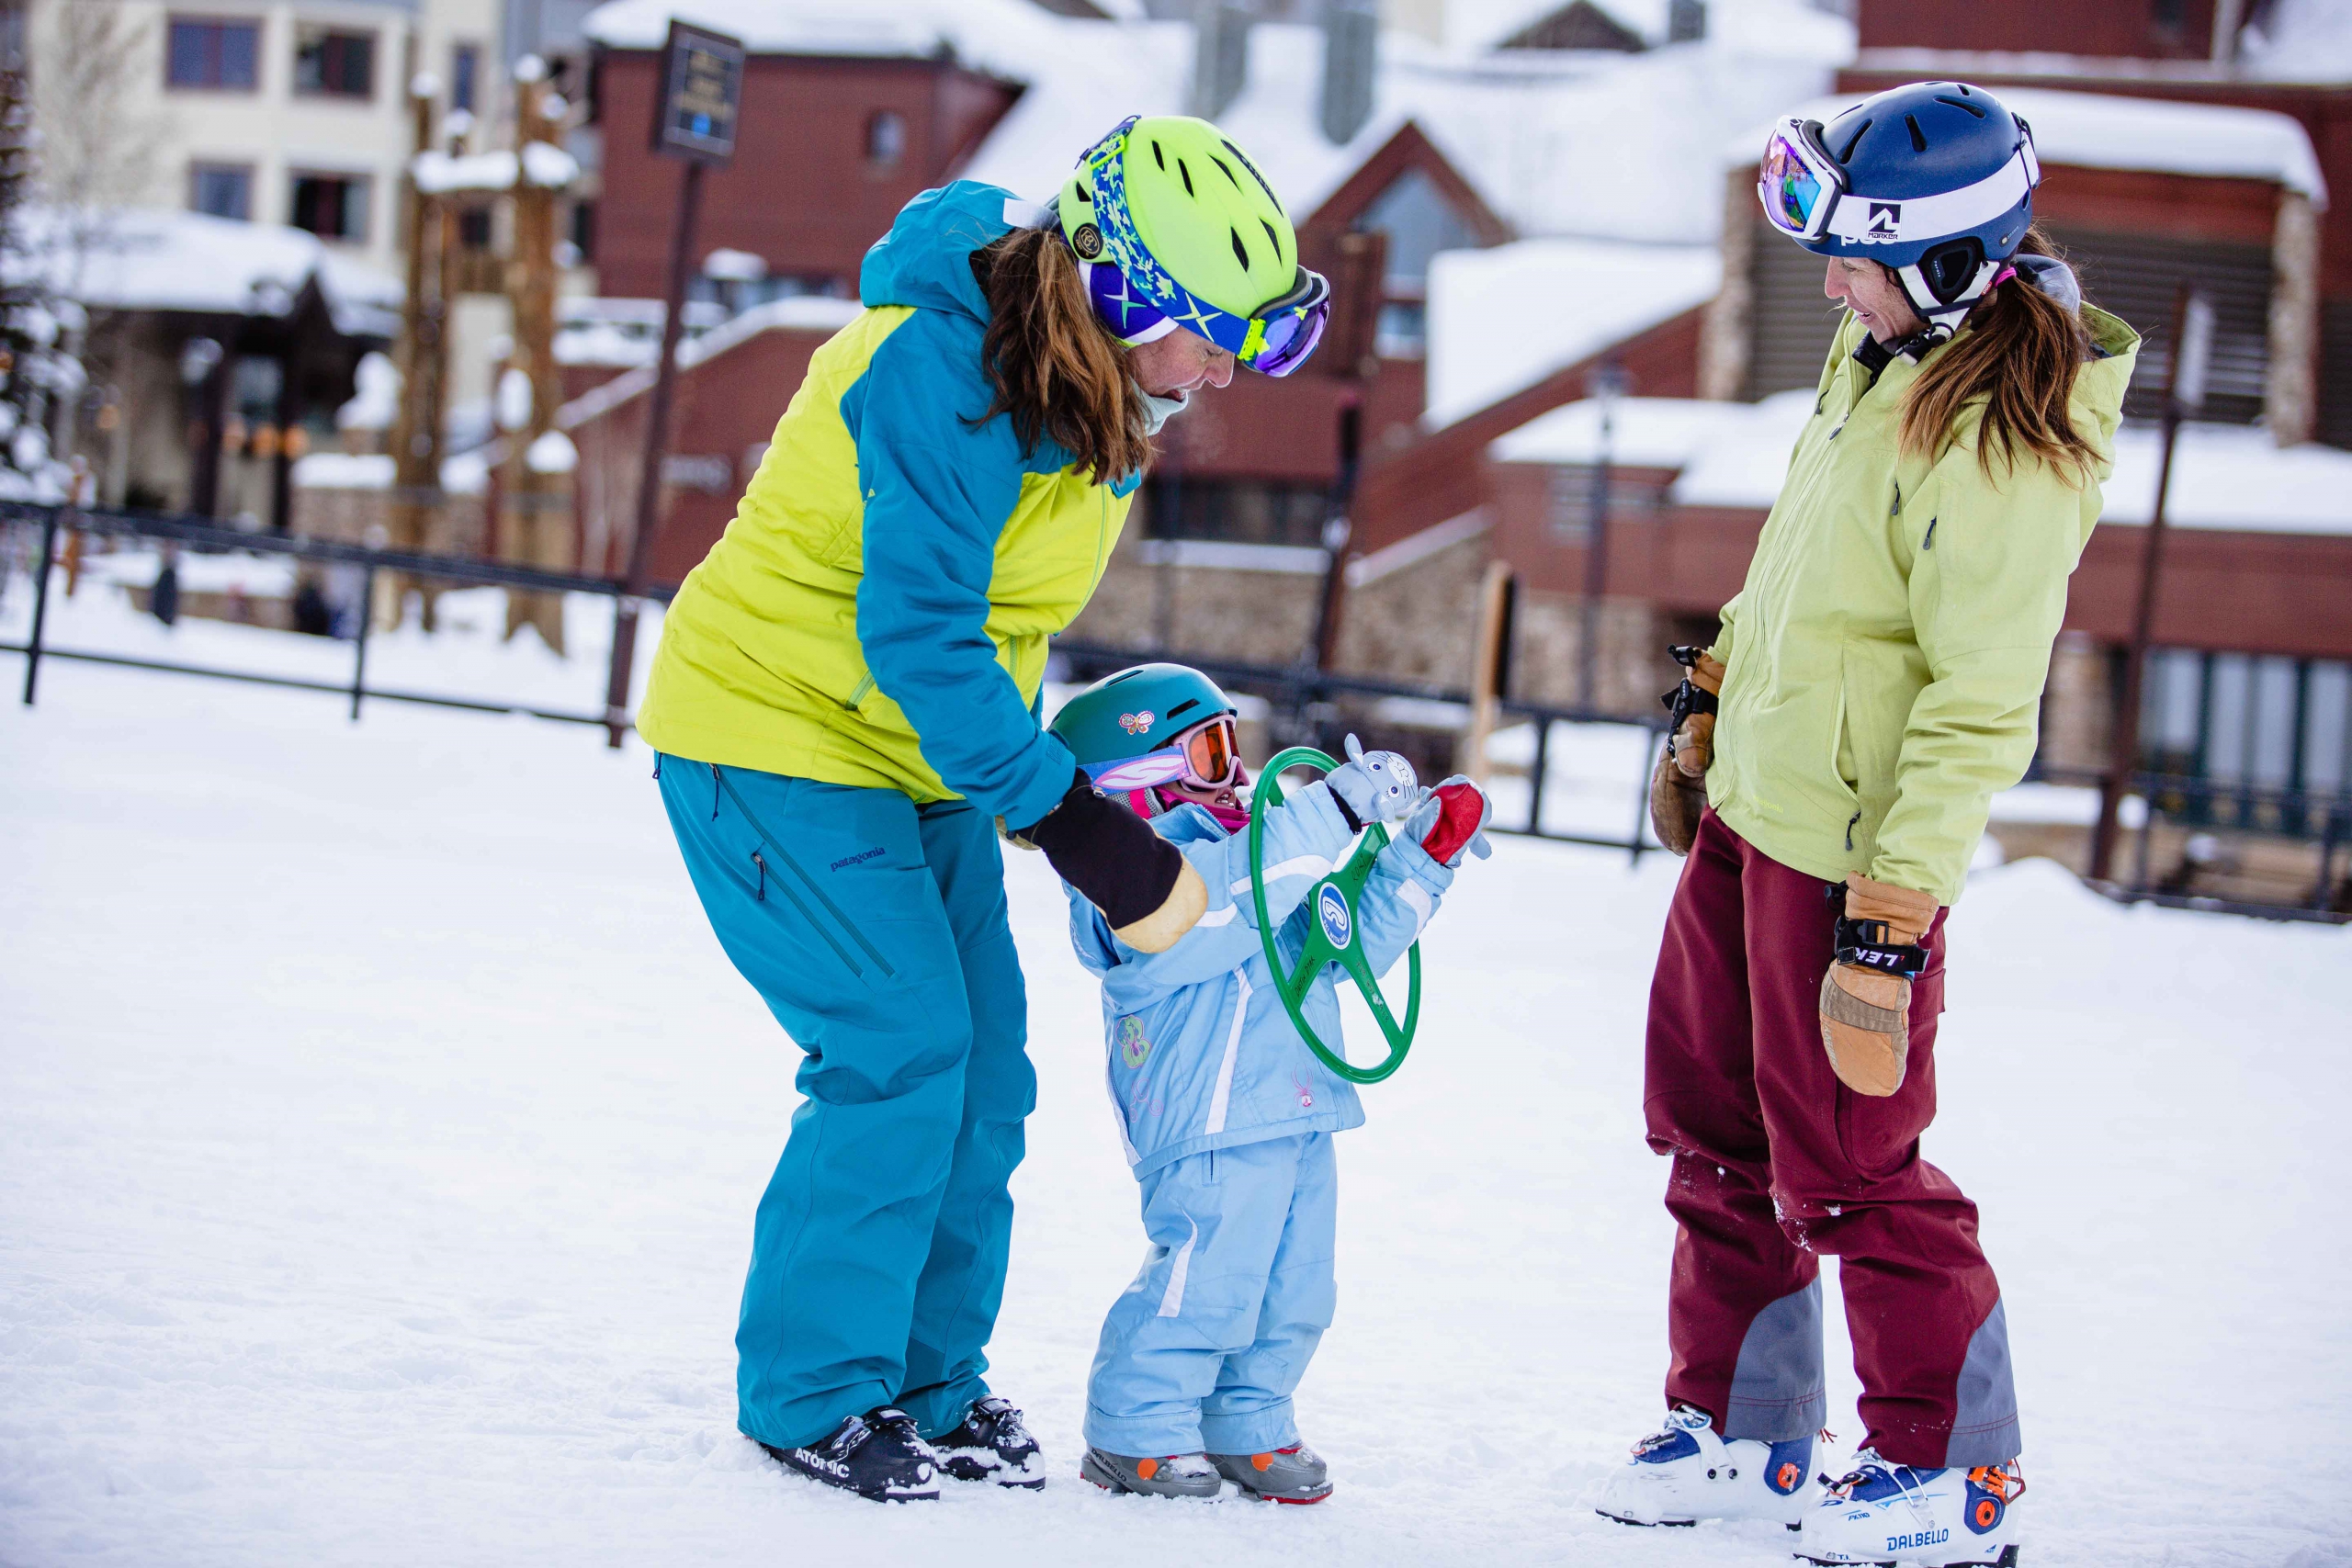 A ski instructor teaches a family and young kids to ski.